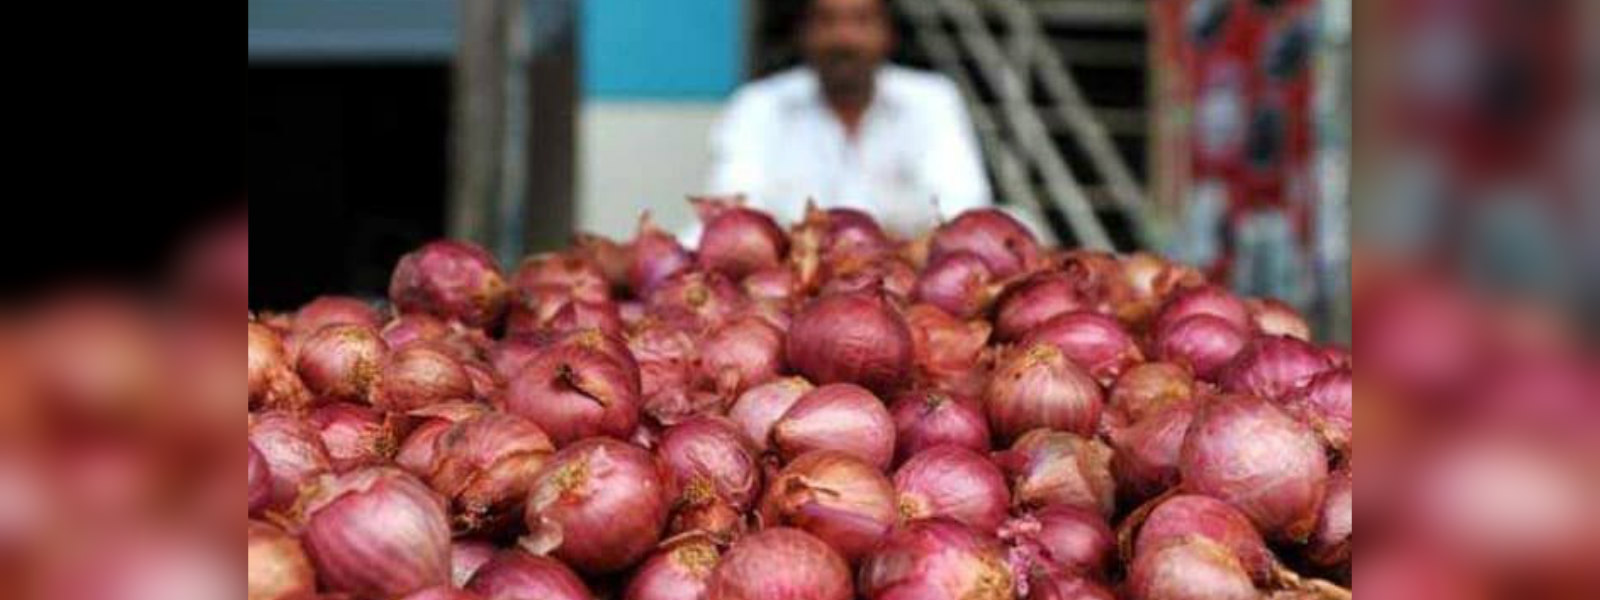 Government to purchase big onions at Rs. 80 